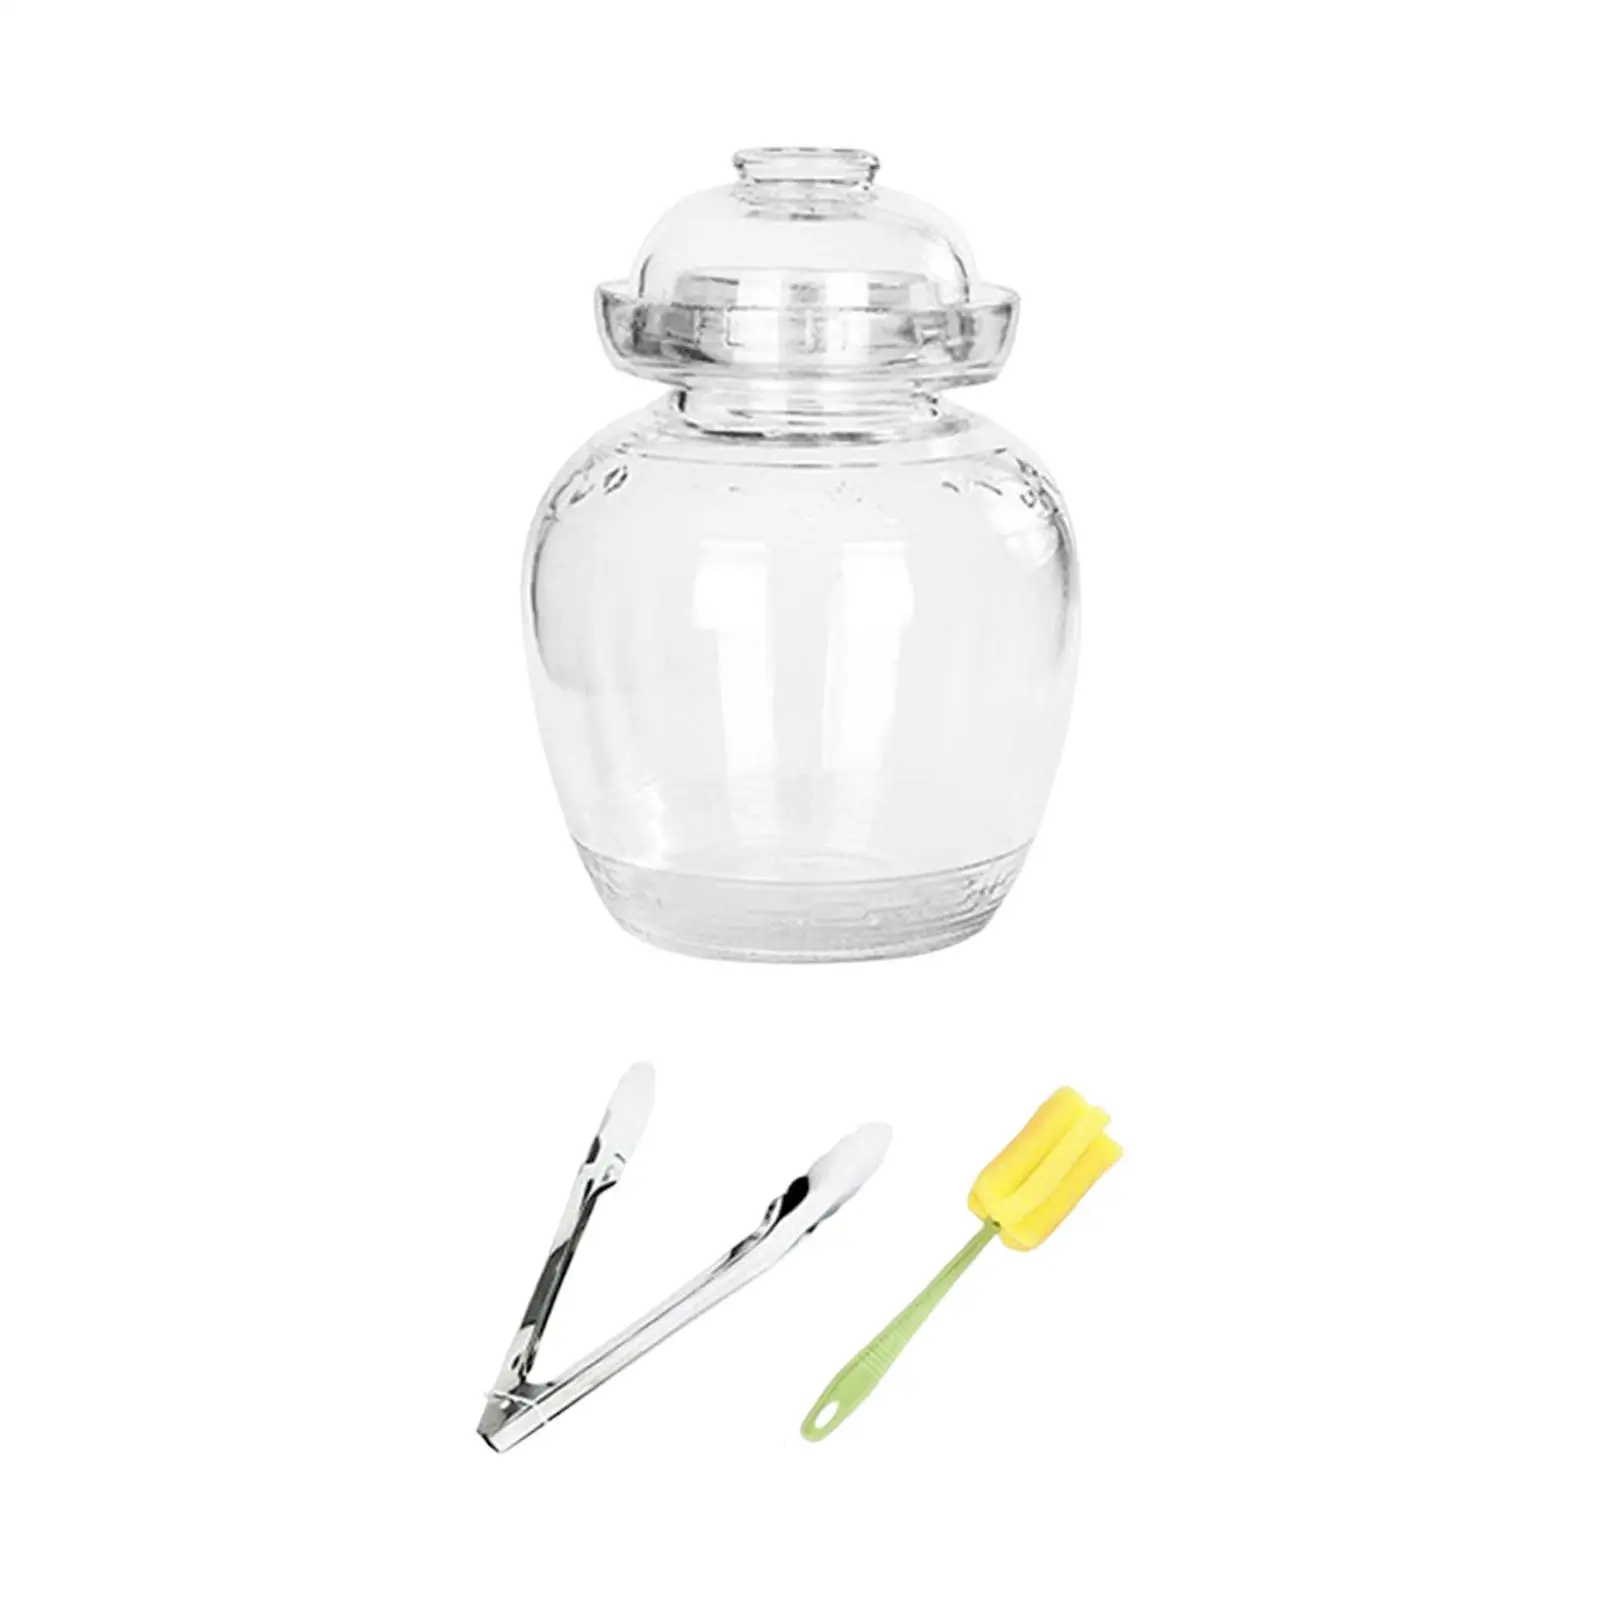 Glass Pickle Jar Durable Stable with Lid Convenient to Observe Food Containers Thick Glass Fermenting Jar for Household Cooking